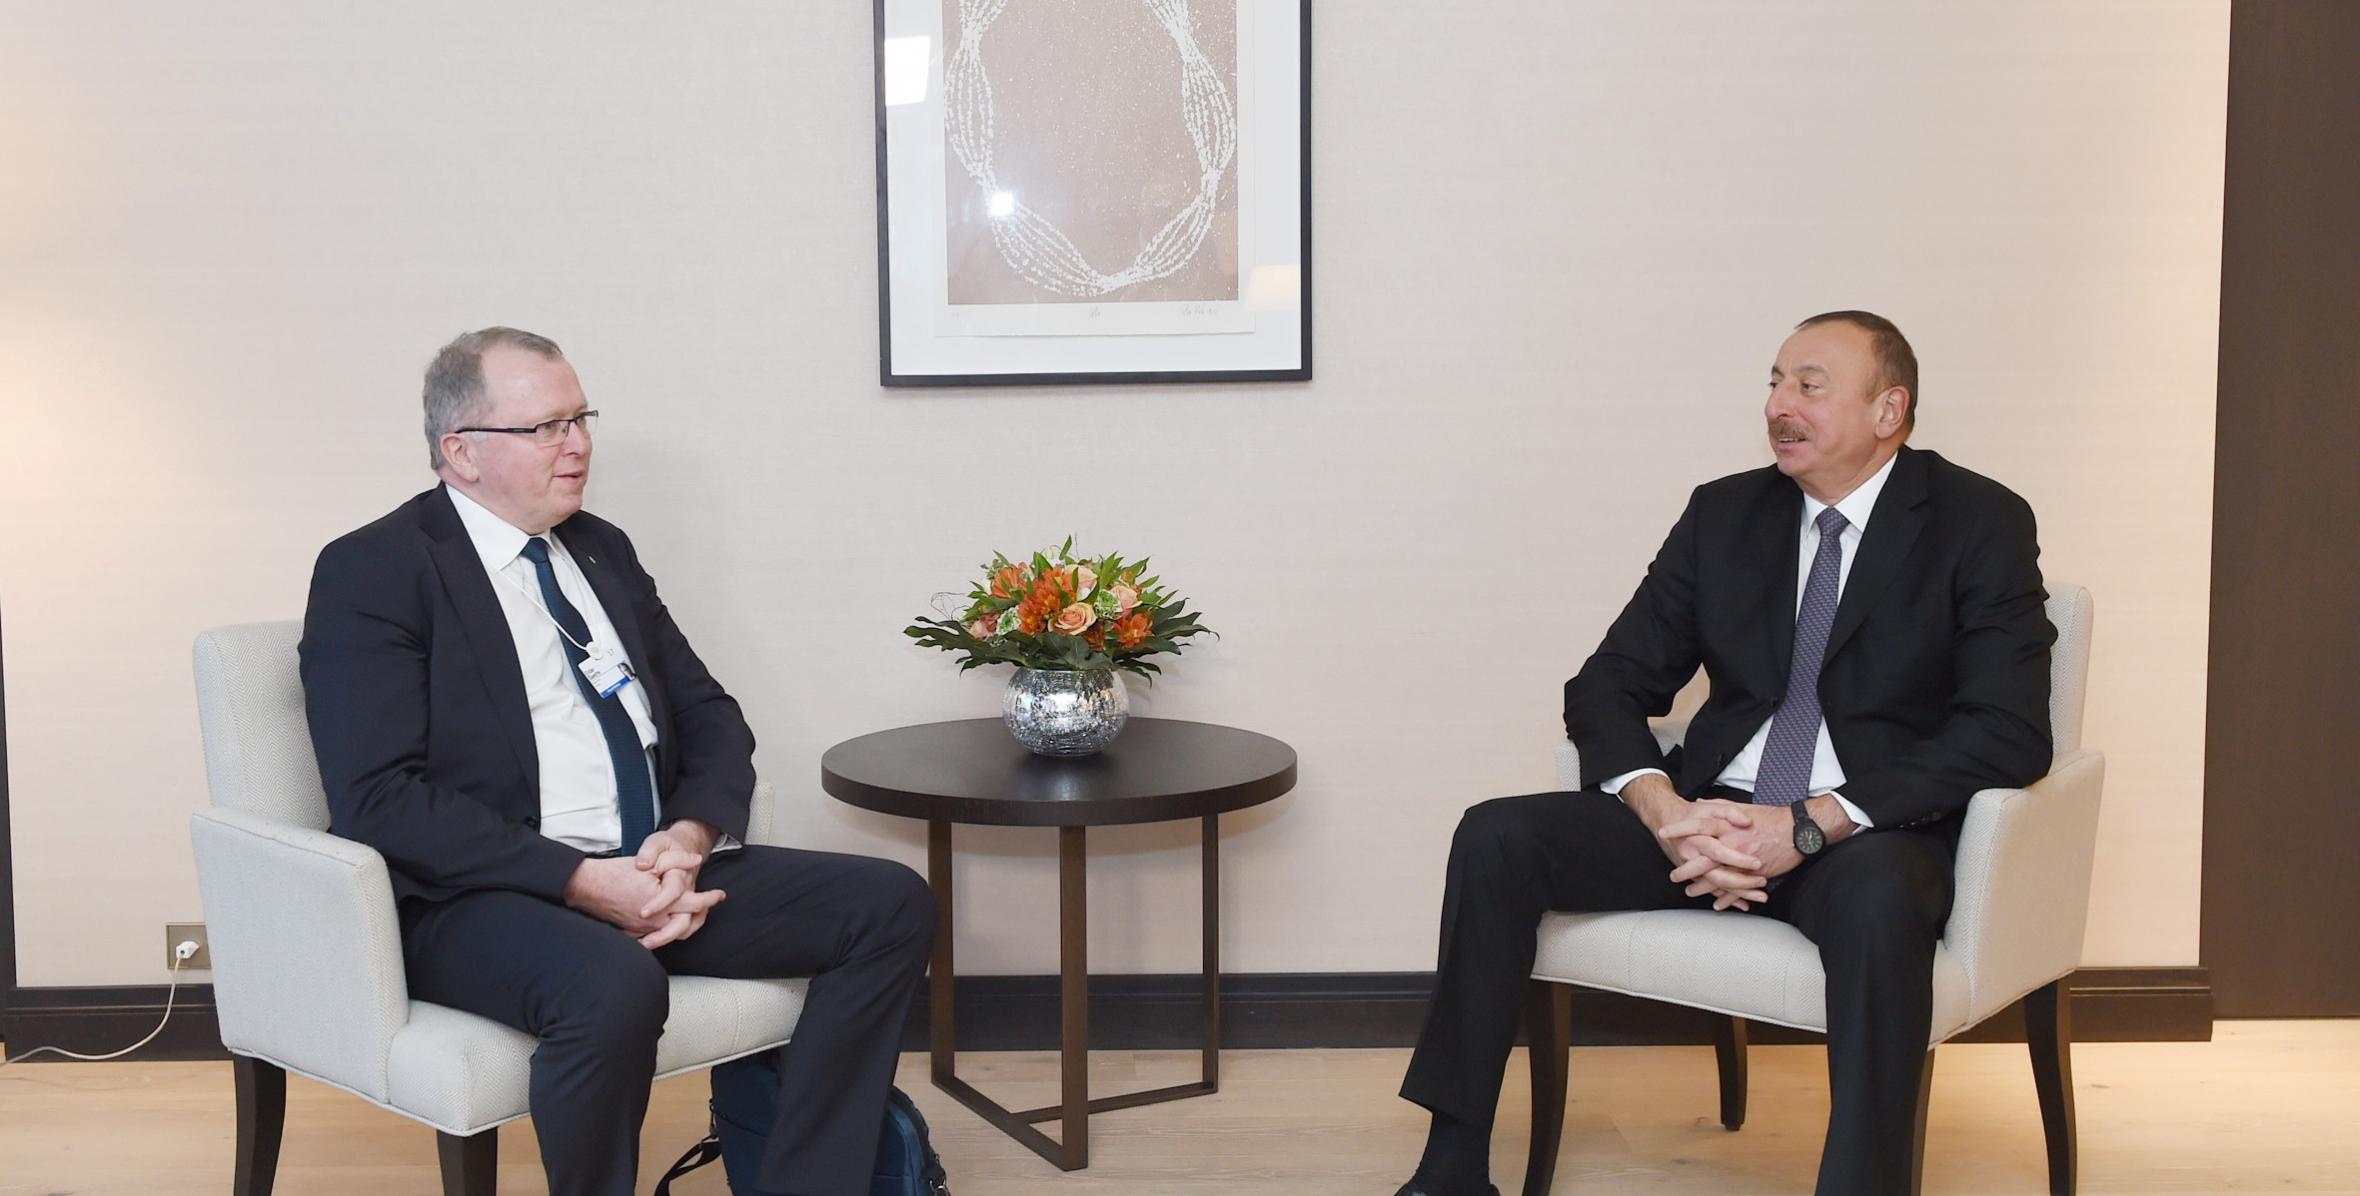 Ilham Aliyev met with Statoil Chief Executive Officer